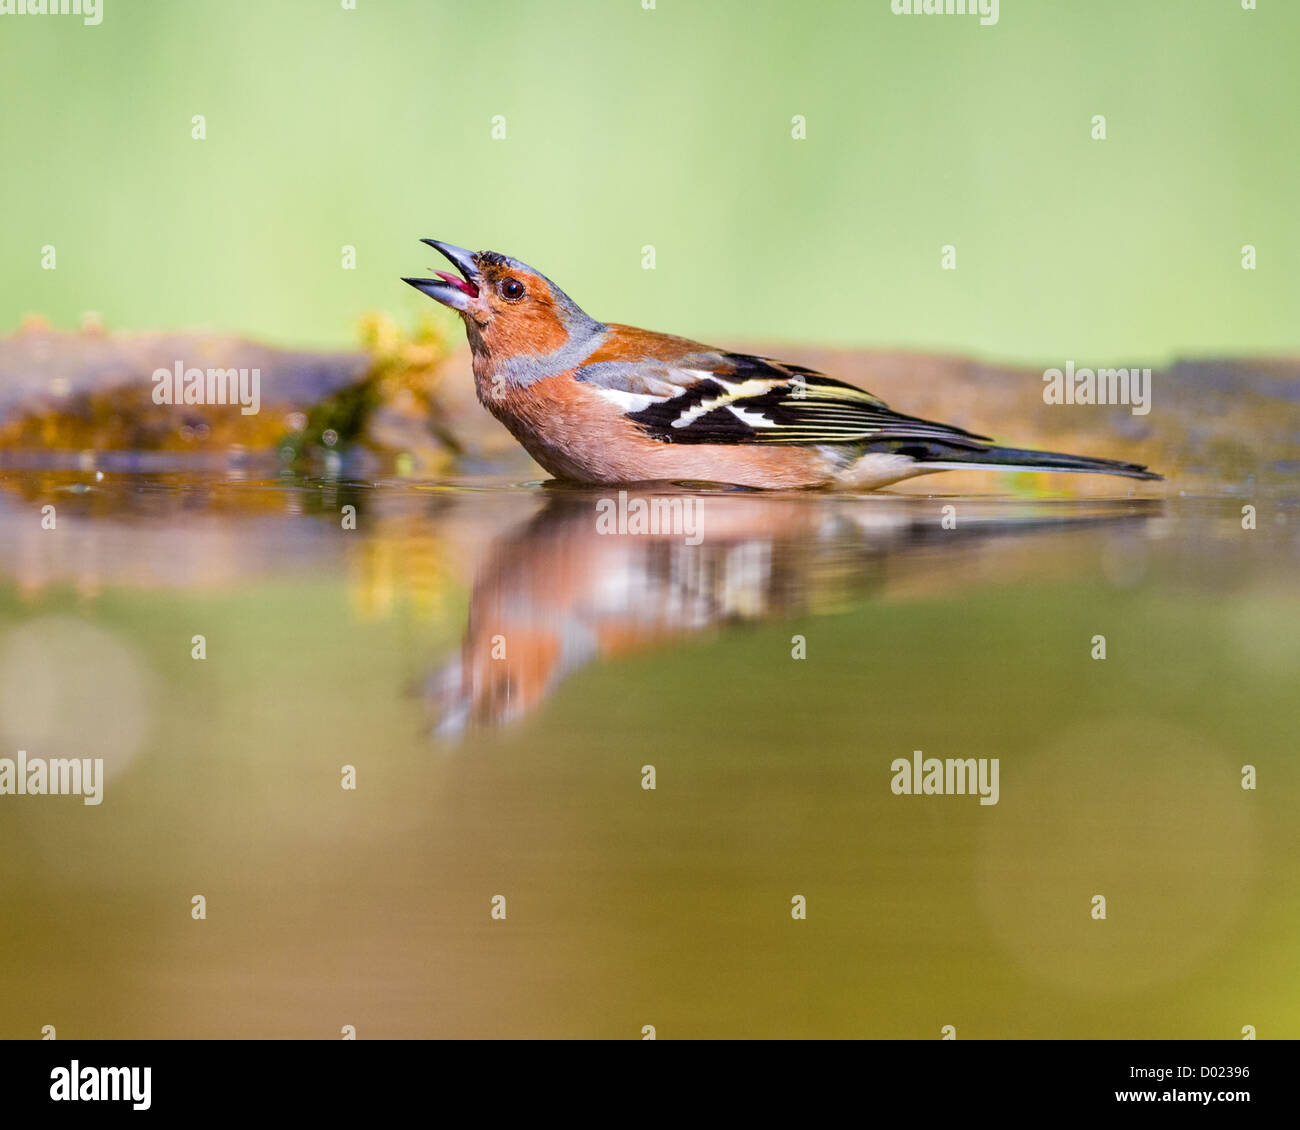 Male chaffinch (Fringilla coelebs) singing in a forest pool in Hyngary. Stock Photo